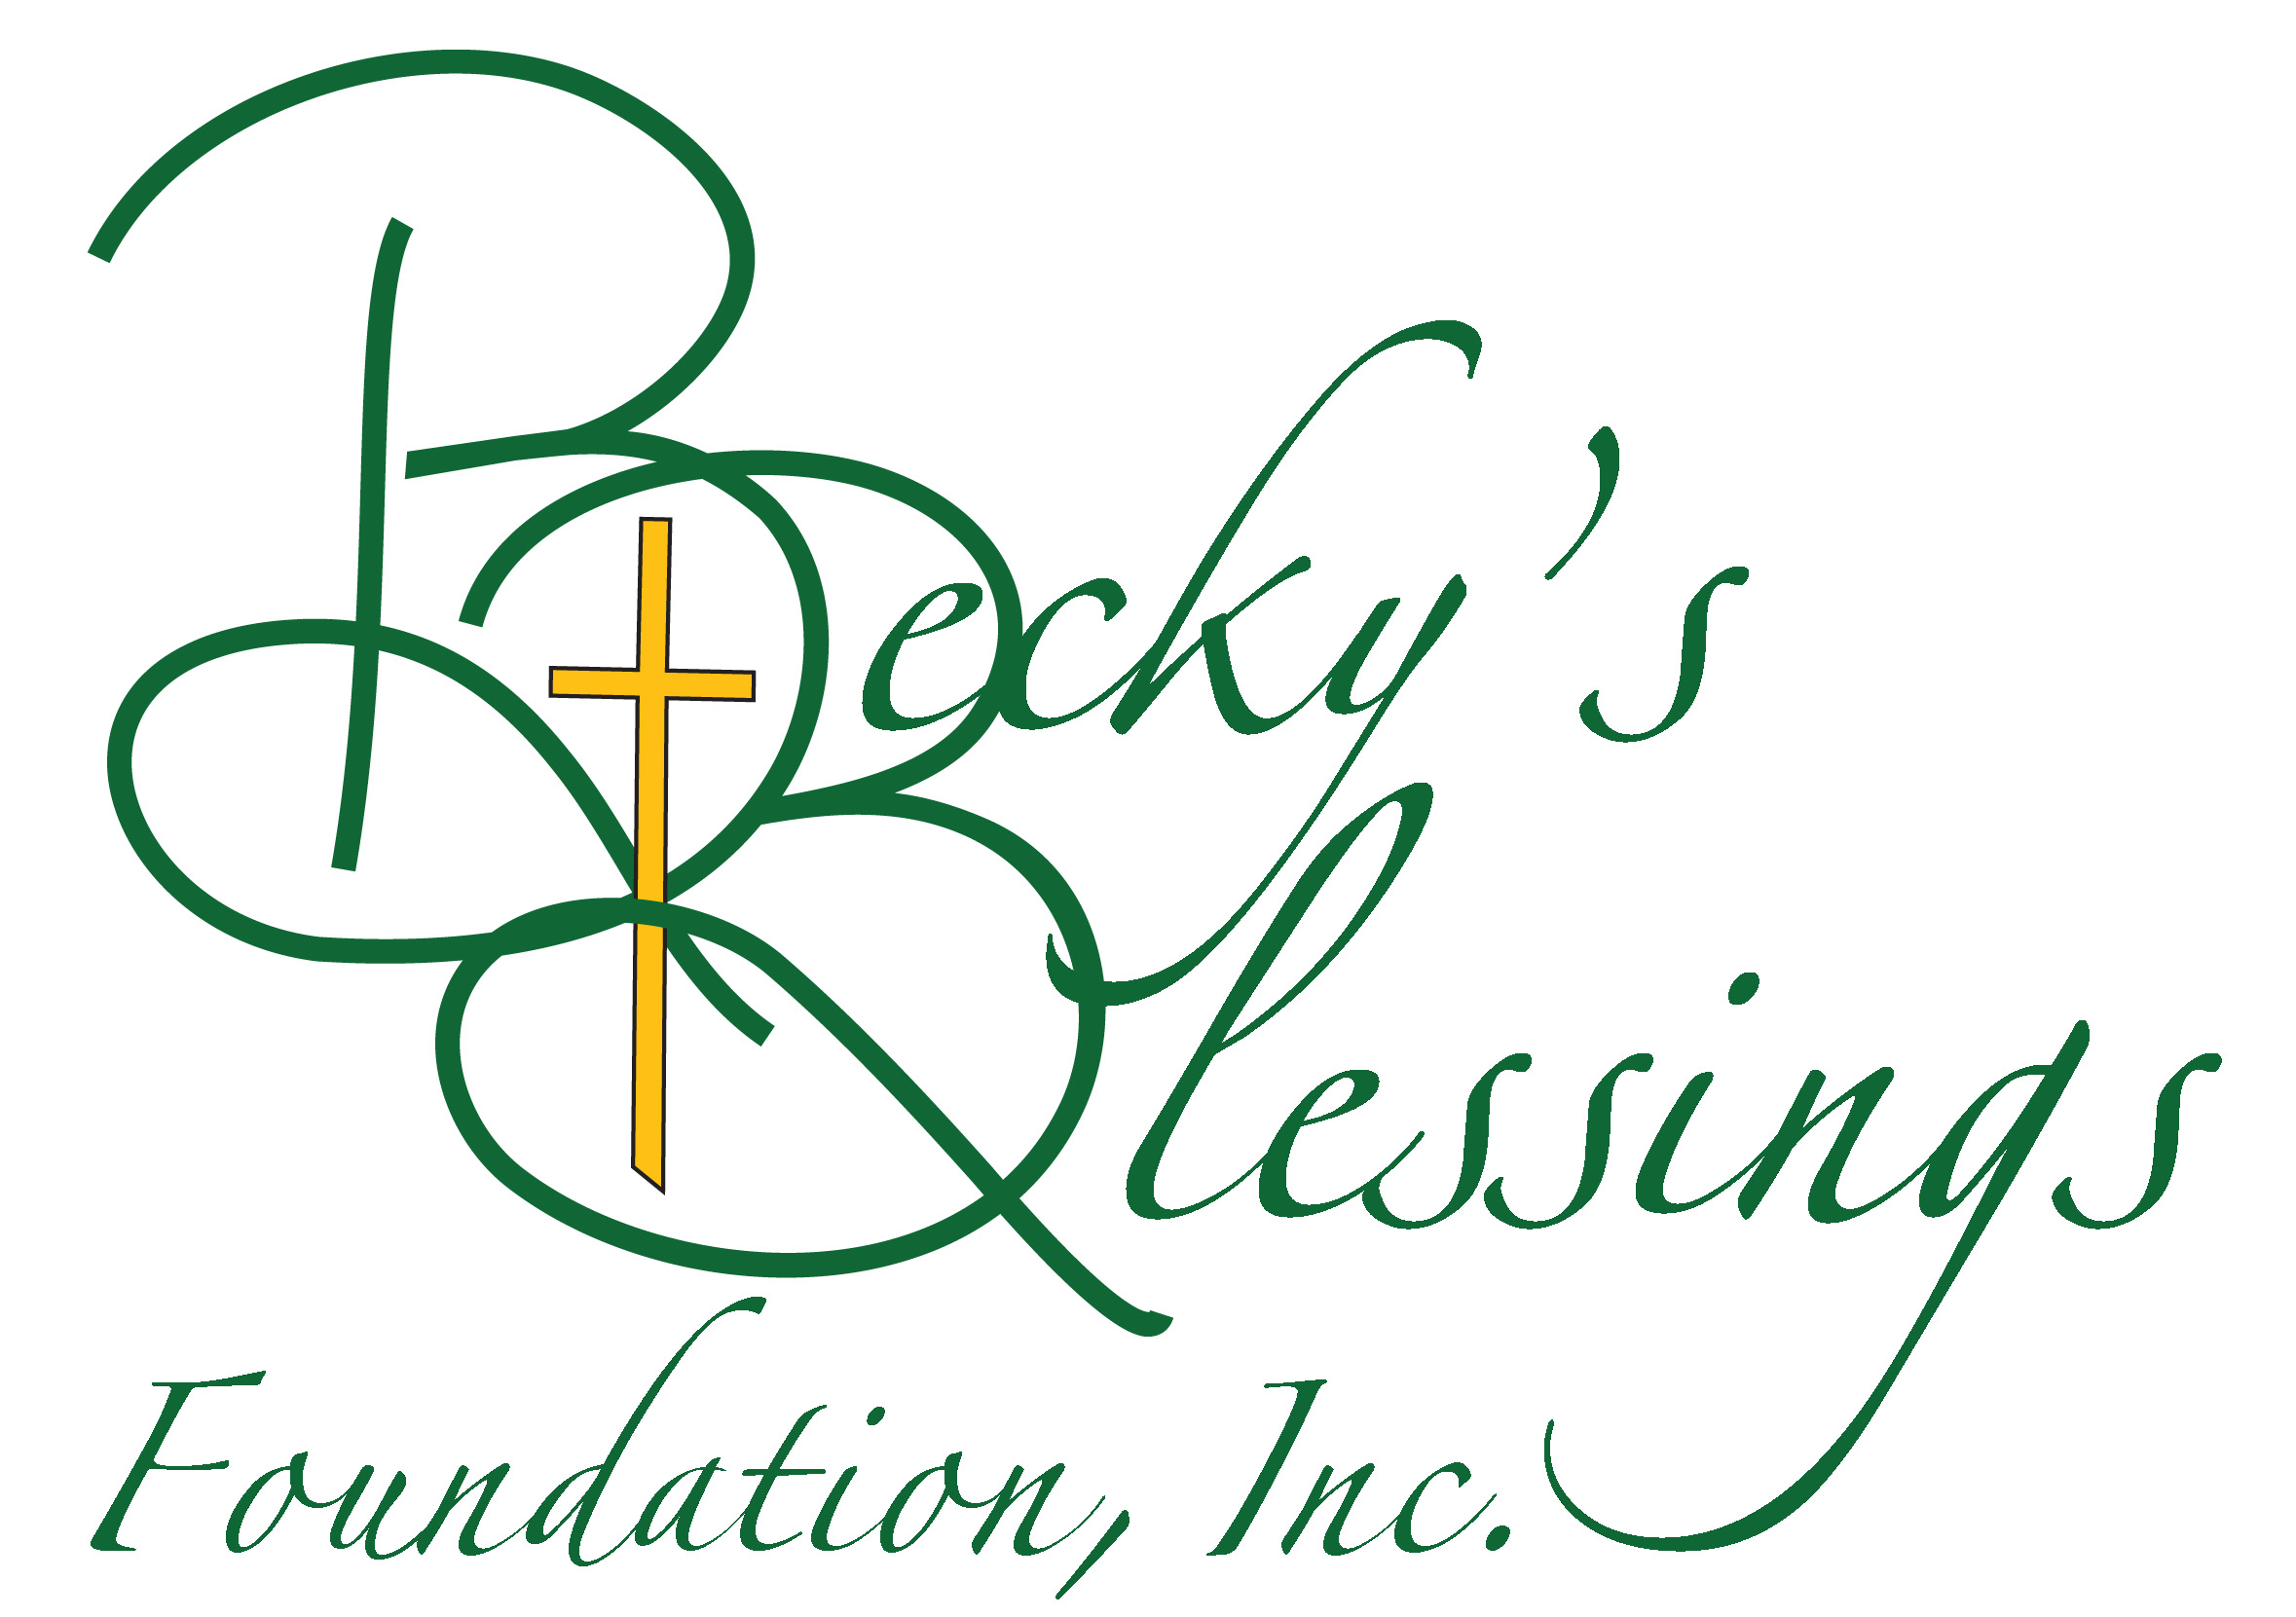 Becky's Blessings Foundation, Inc.